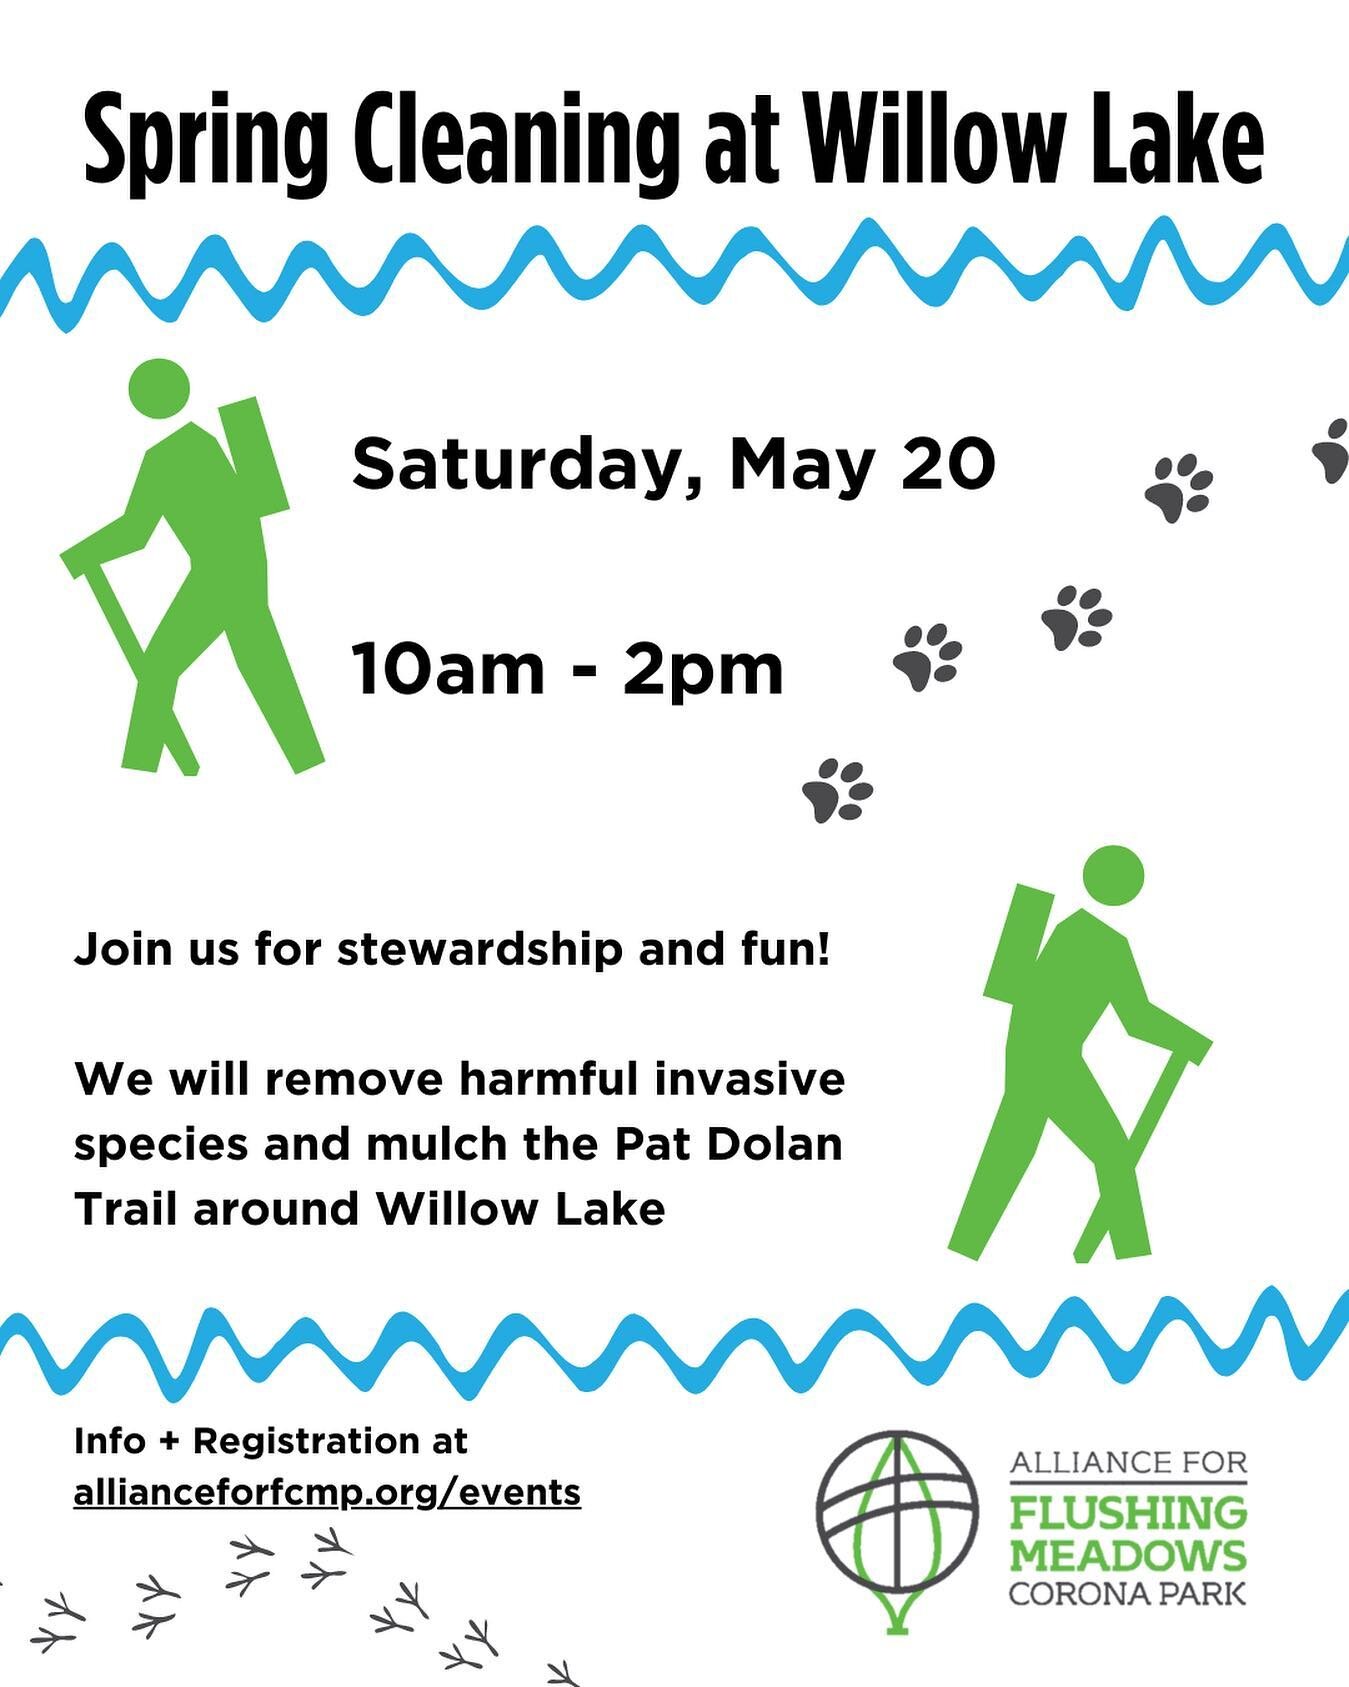 New Volunteer Opportunity! Happening May 20th at Willow Lake. Be sure to visit our events page for more info and registration. Link in bio.
#volunteeropportunities #queensevents #nycparks